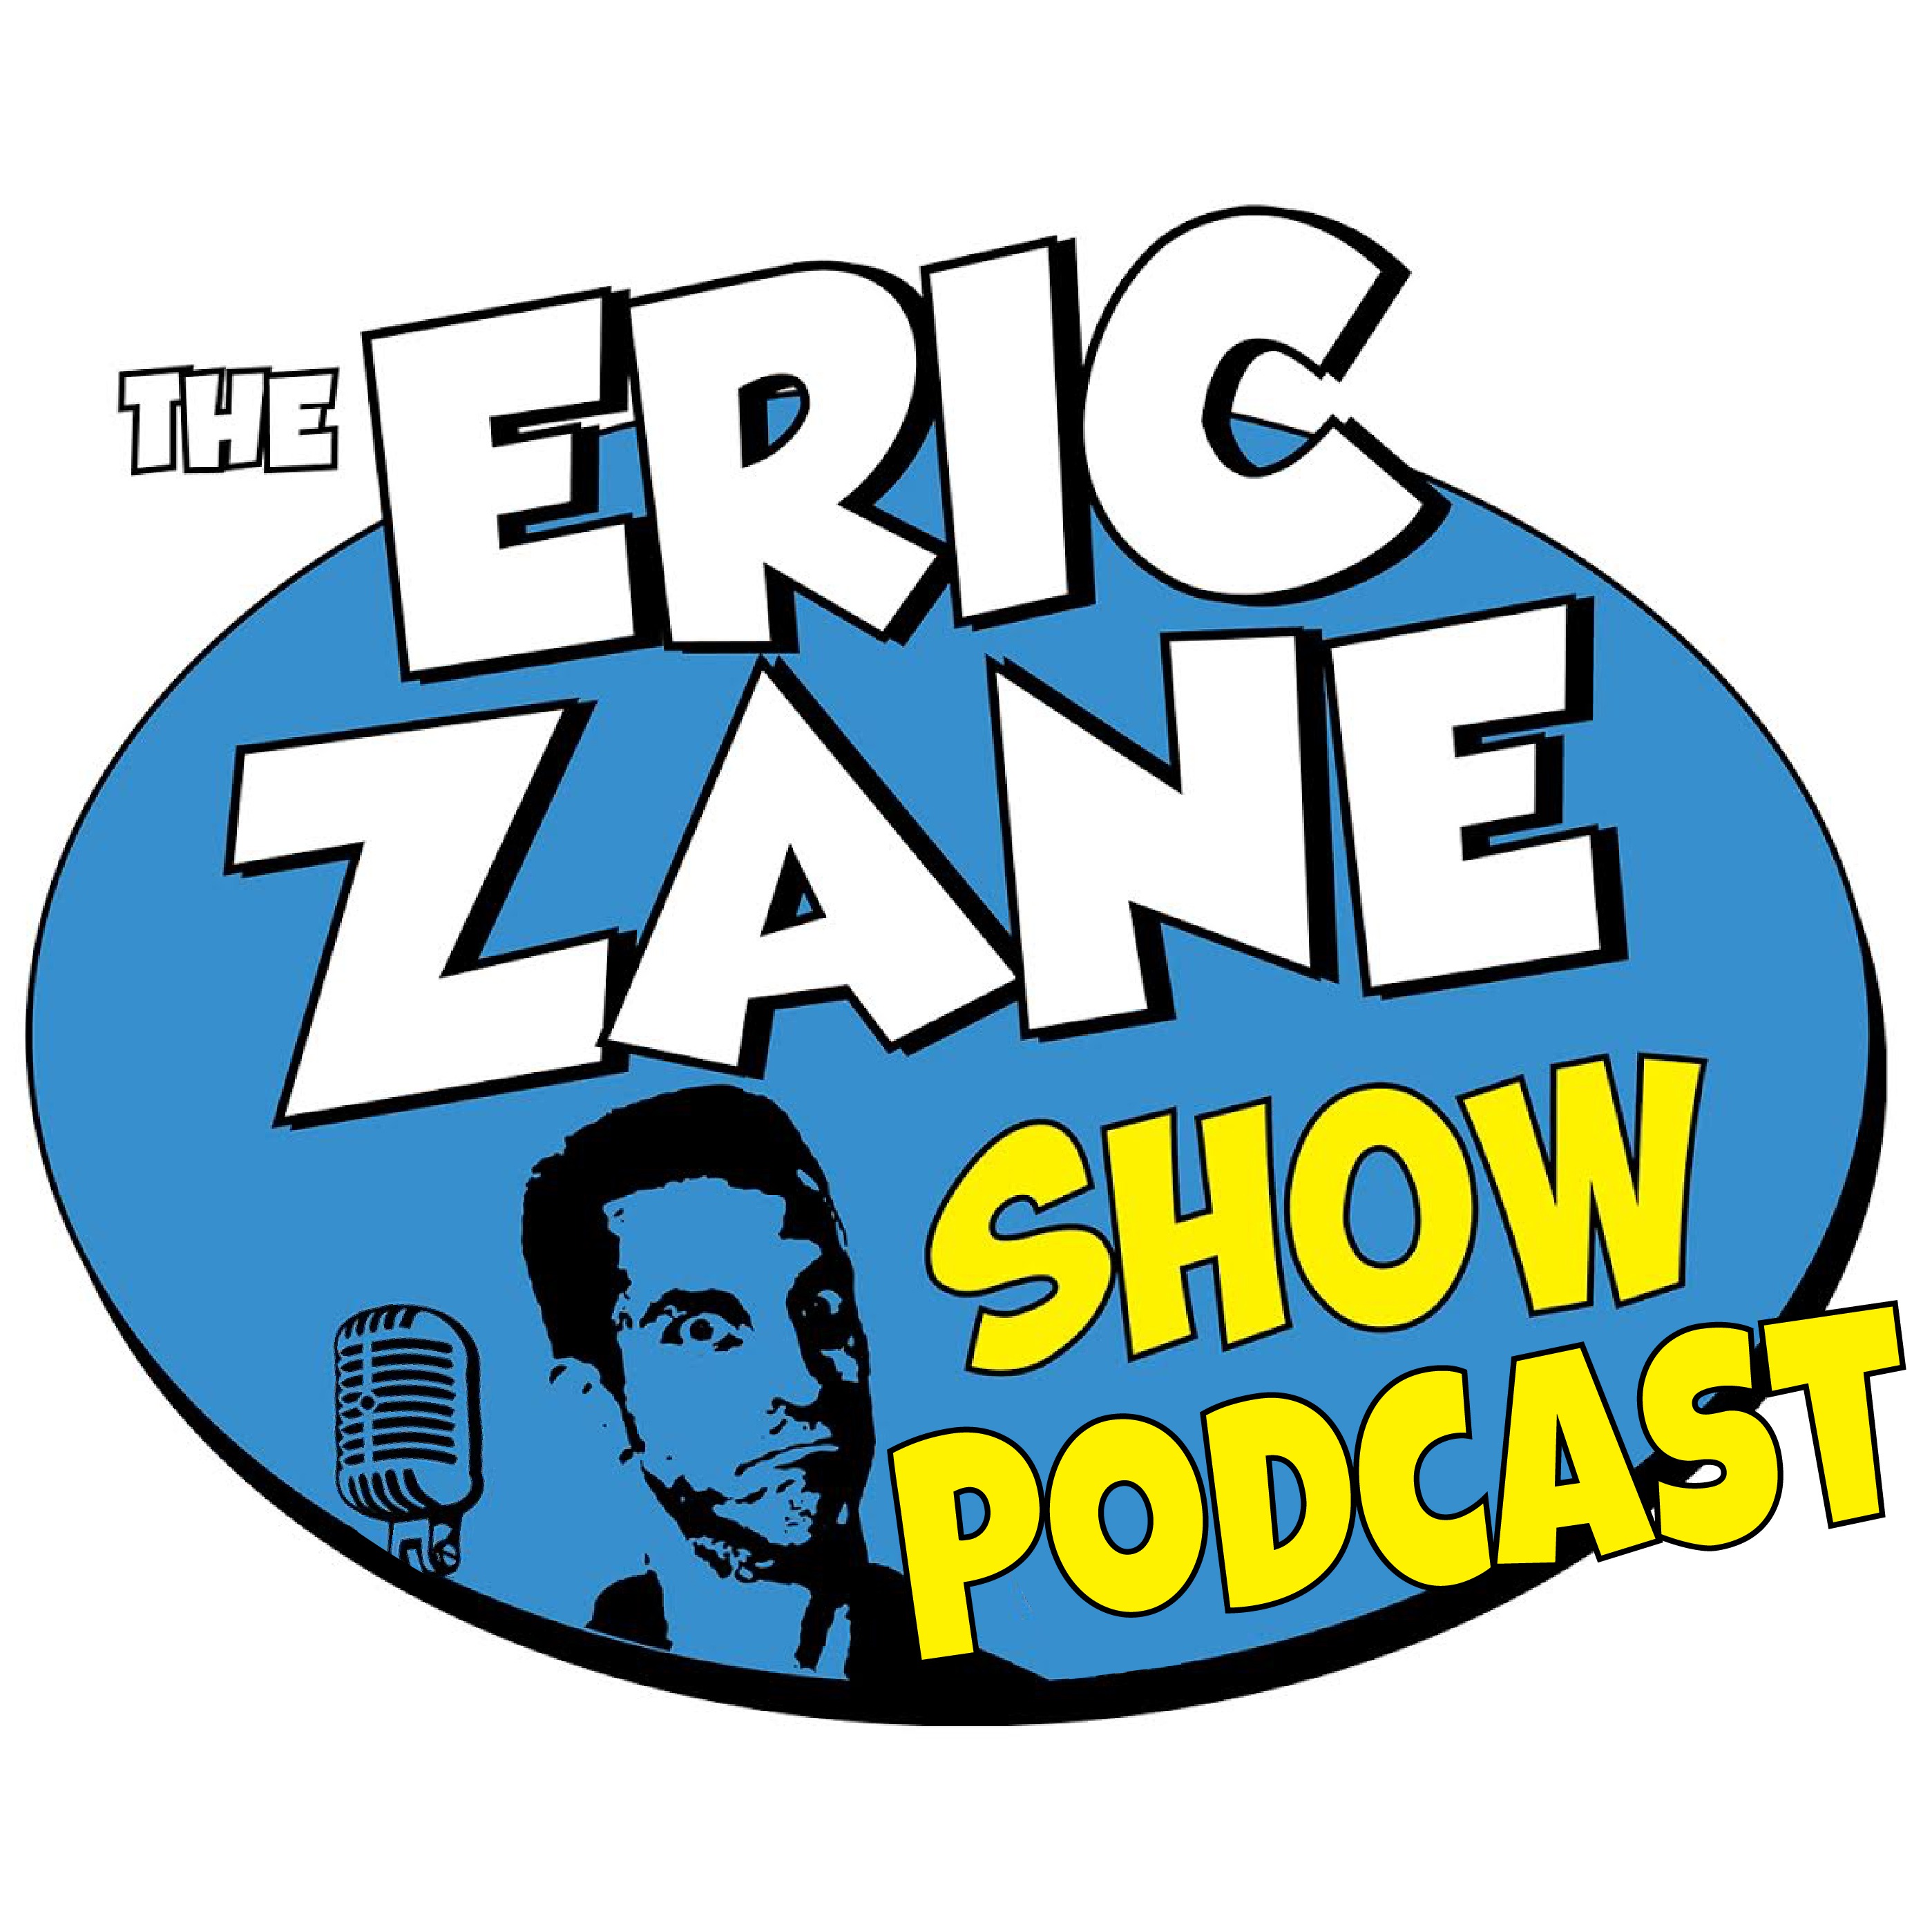 Eric Zane Show Podcast 961 - Another mom gives birth/ didn't know preggers story